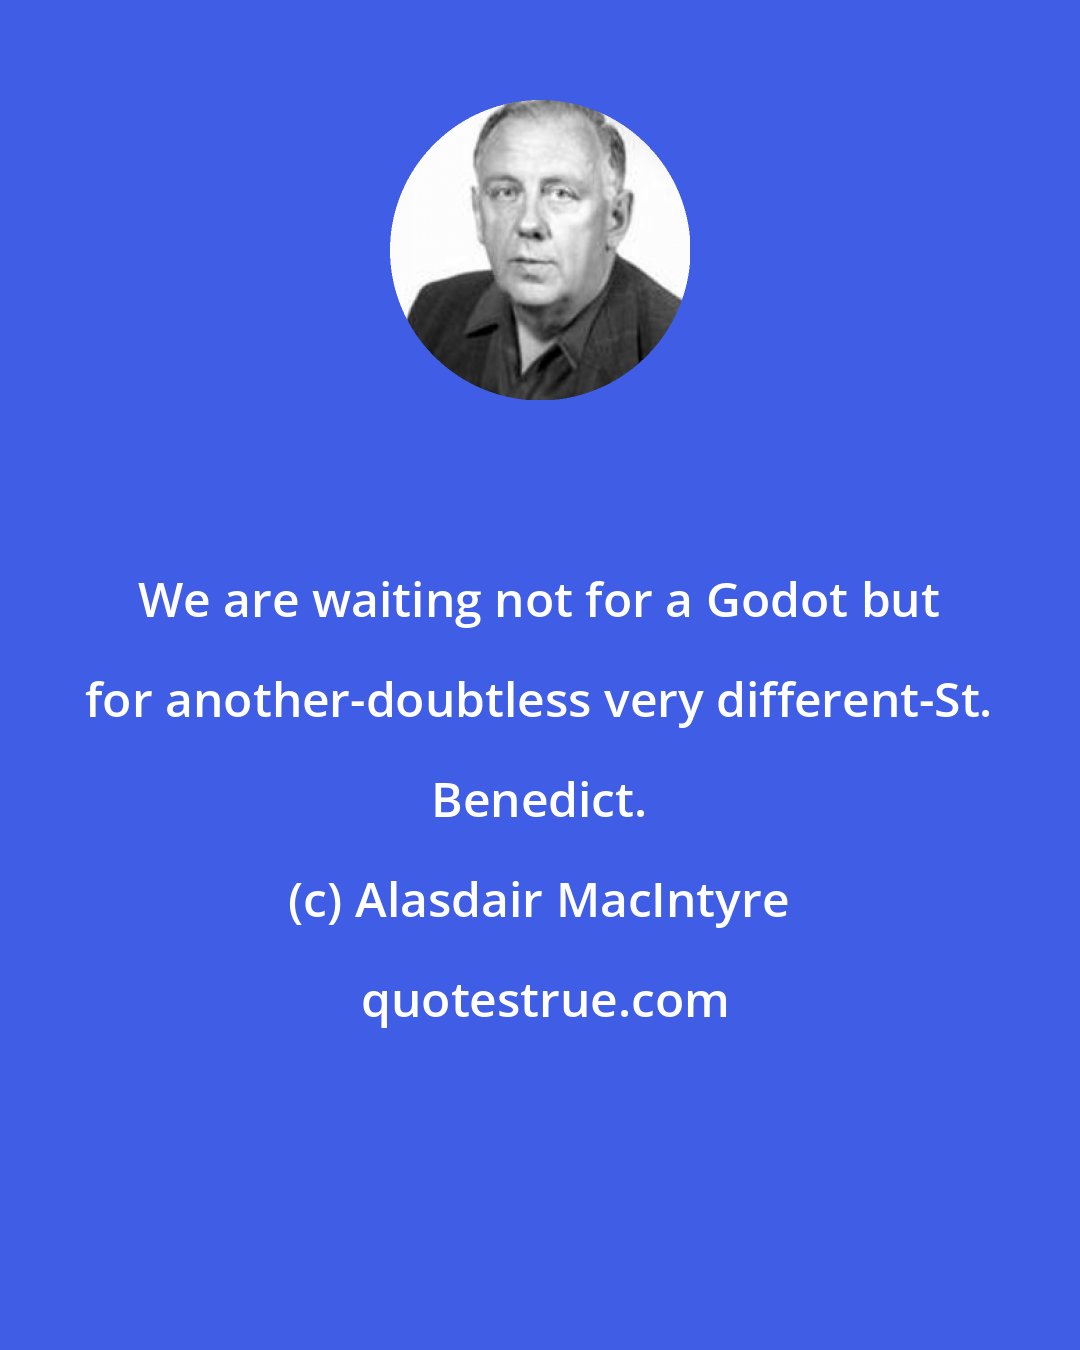 Alasdair MacIntyre: We are waiting not for a Godot but for another-doubtless very different-St. Benedict.